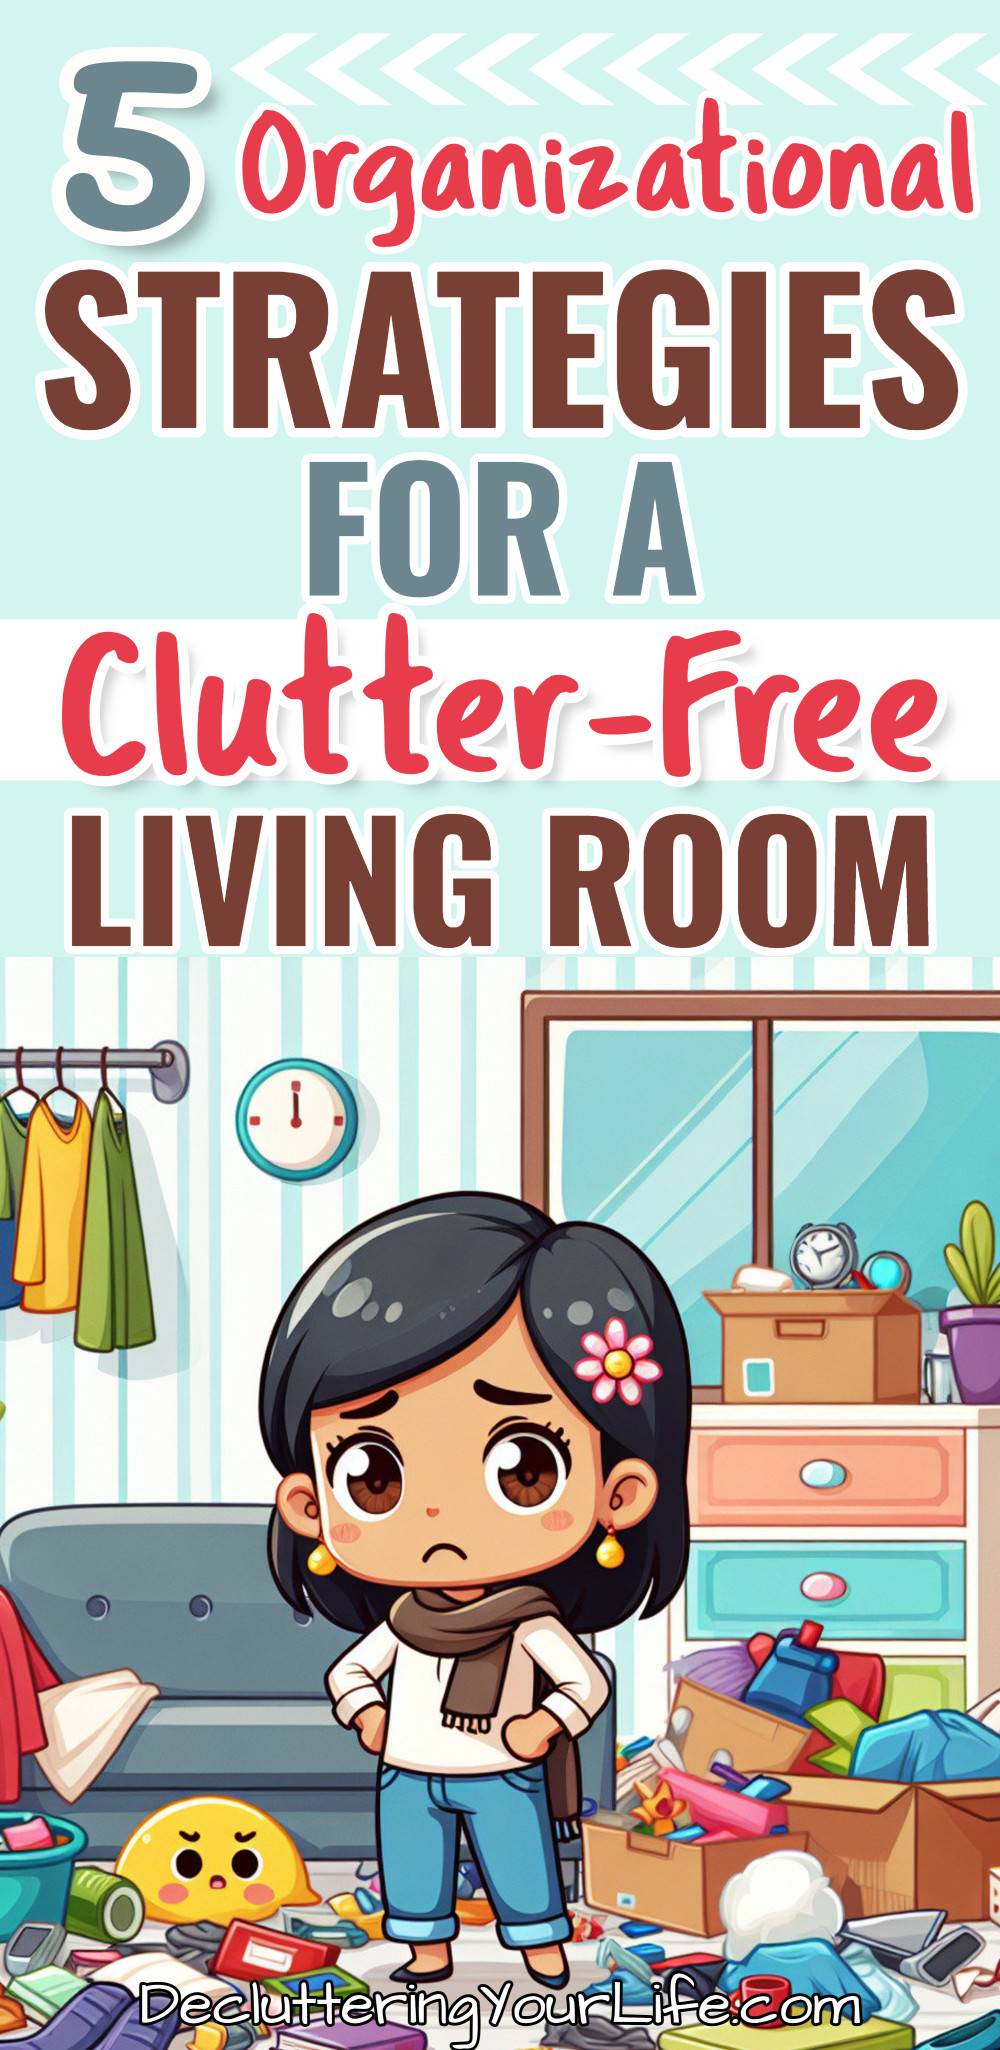 5 organizational strategies for a clutter-free living room